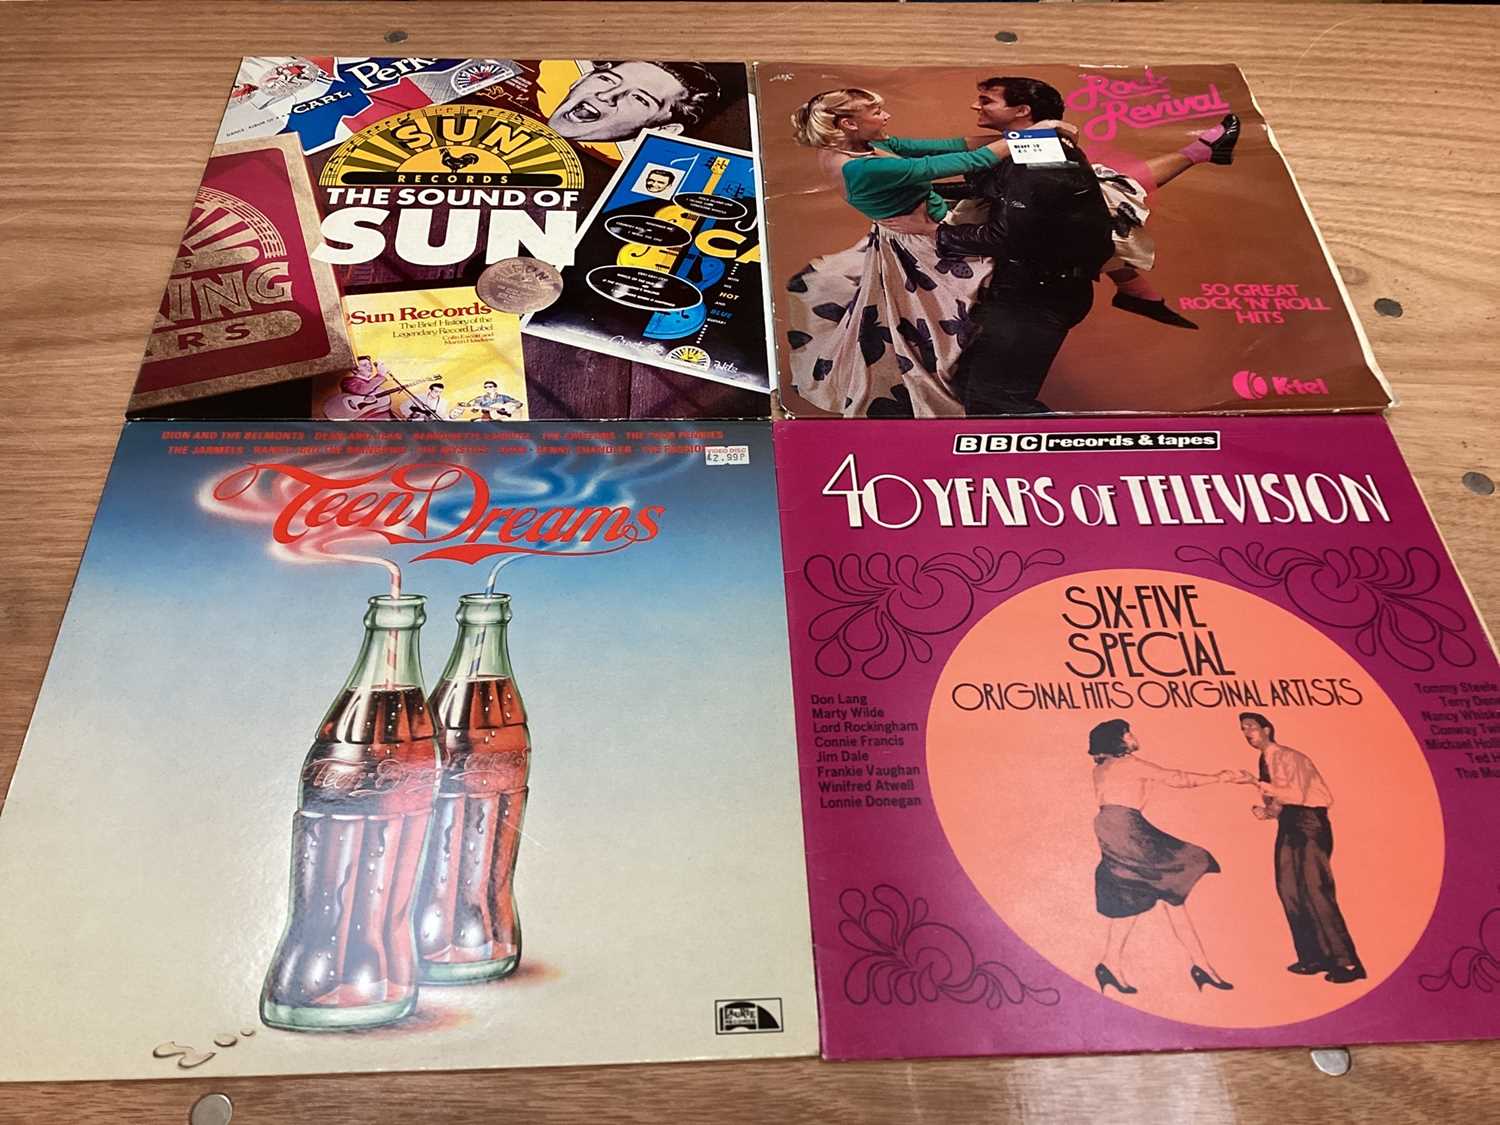 Box of LP records including Smokie, Slade, Shadows, Fergal Sharky and compilations - Image 14 of 38